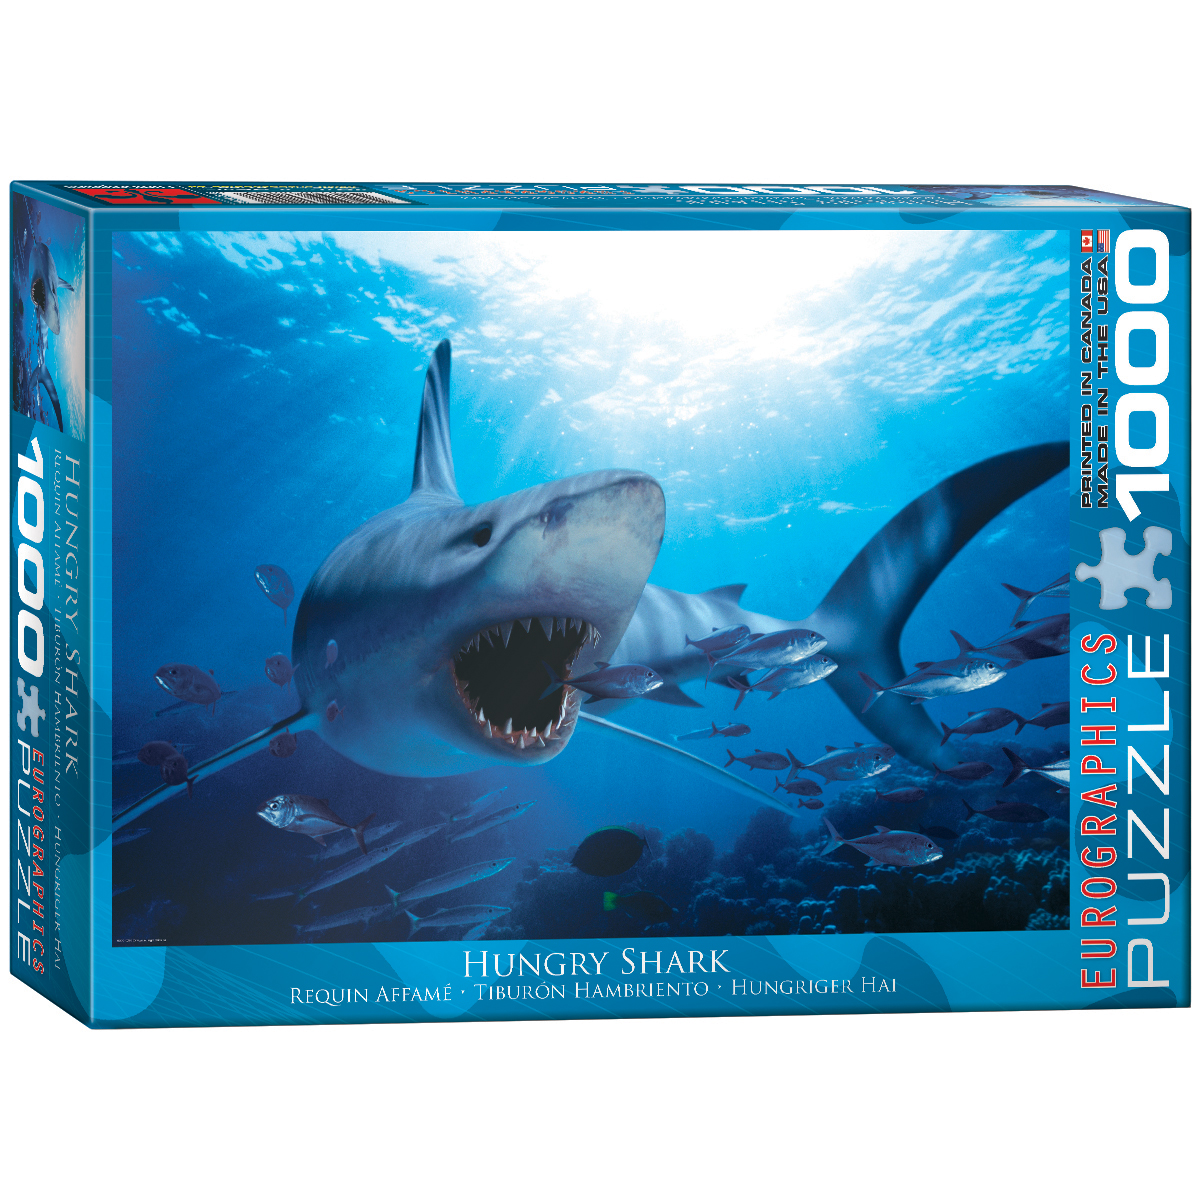 Hungry Shark   Toys & Games   Puzzles   Jigsaw Puzzles